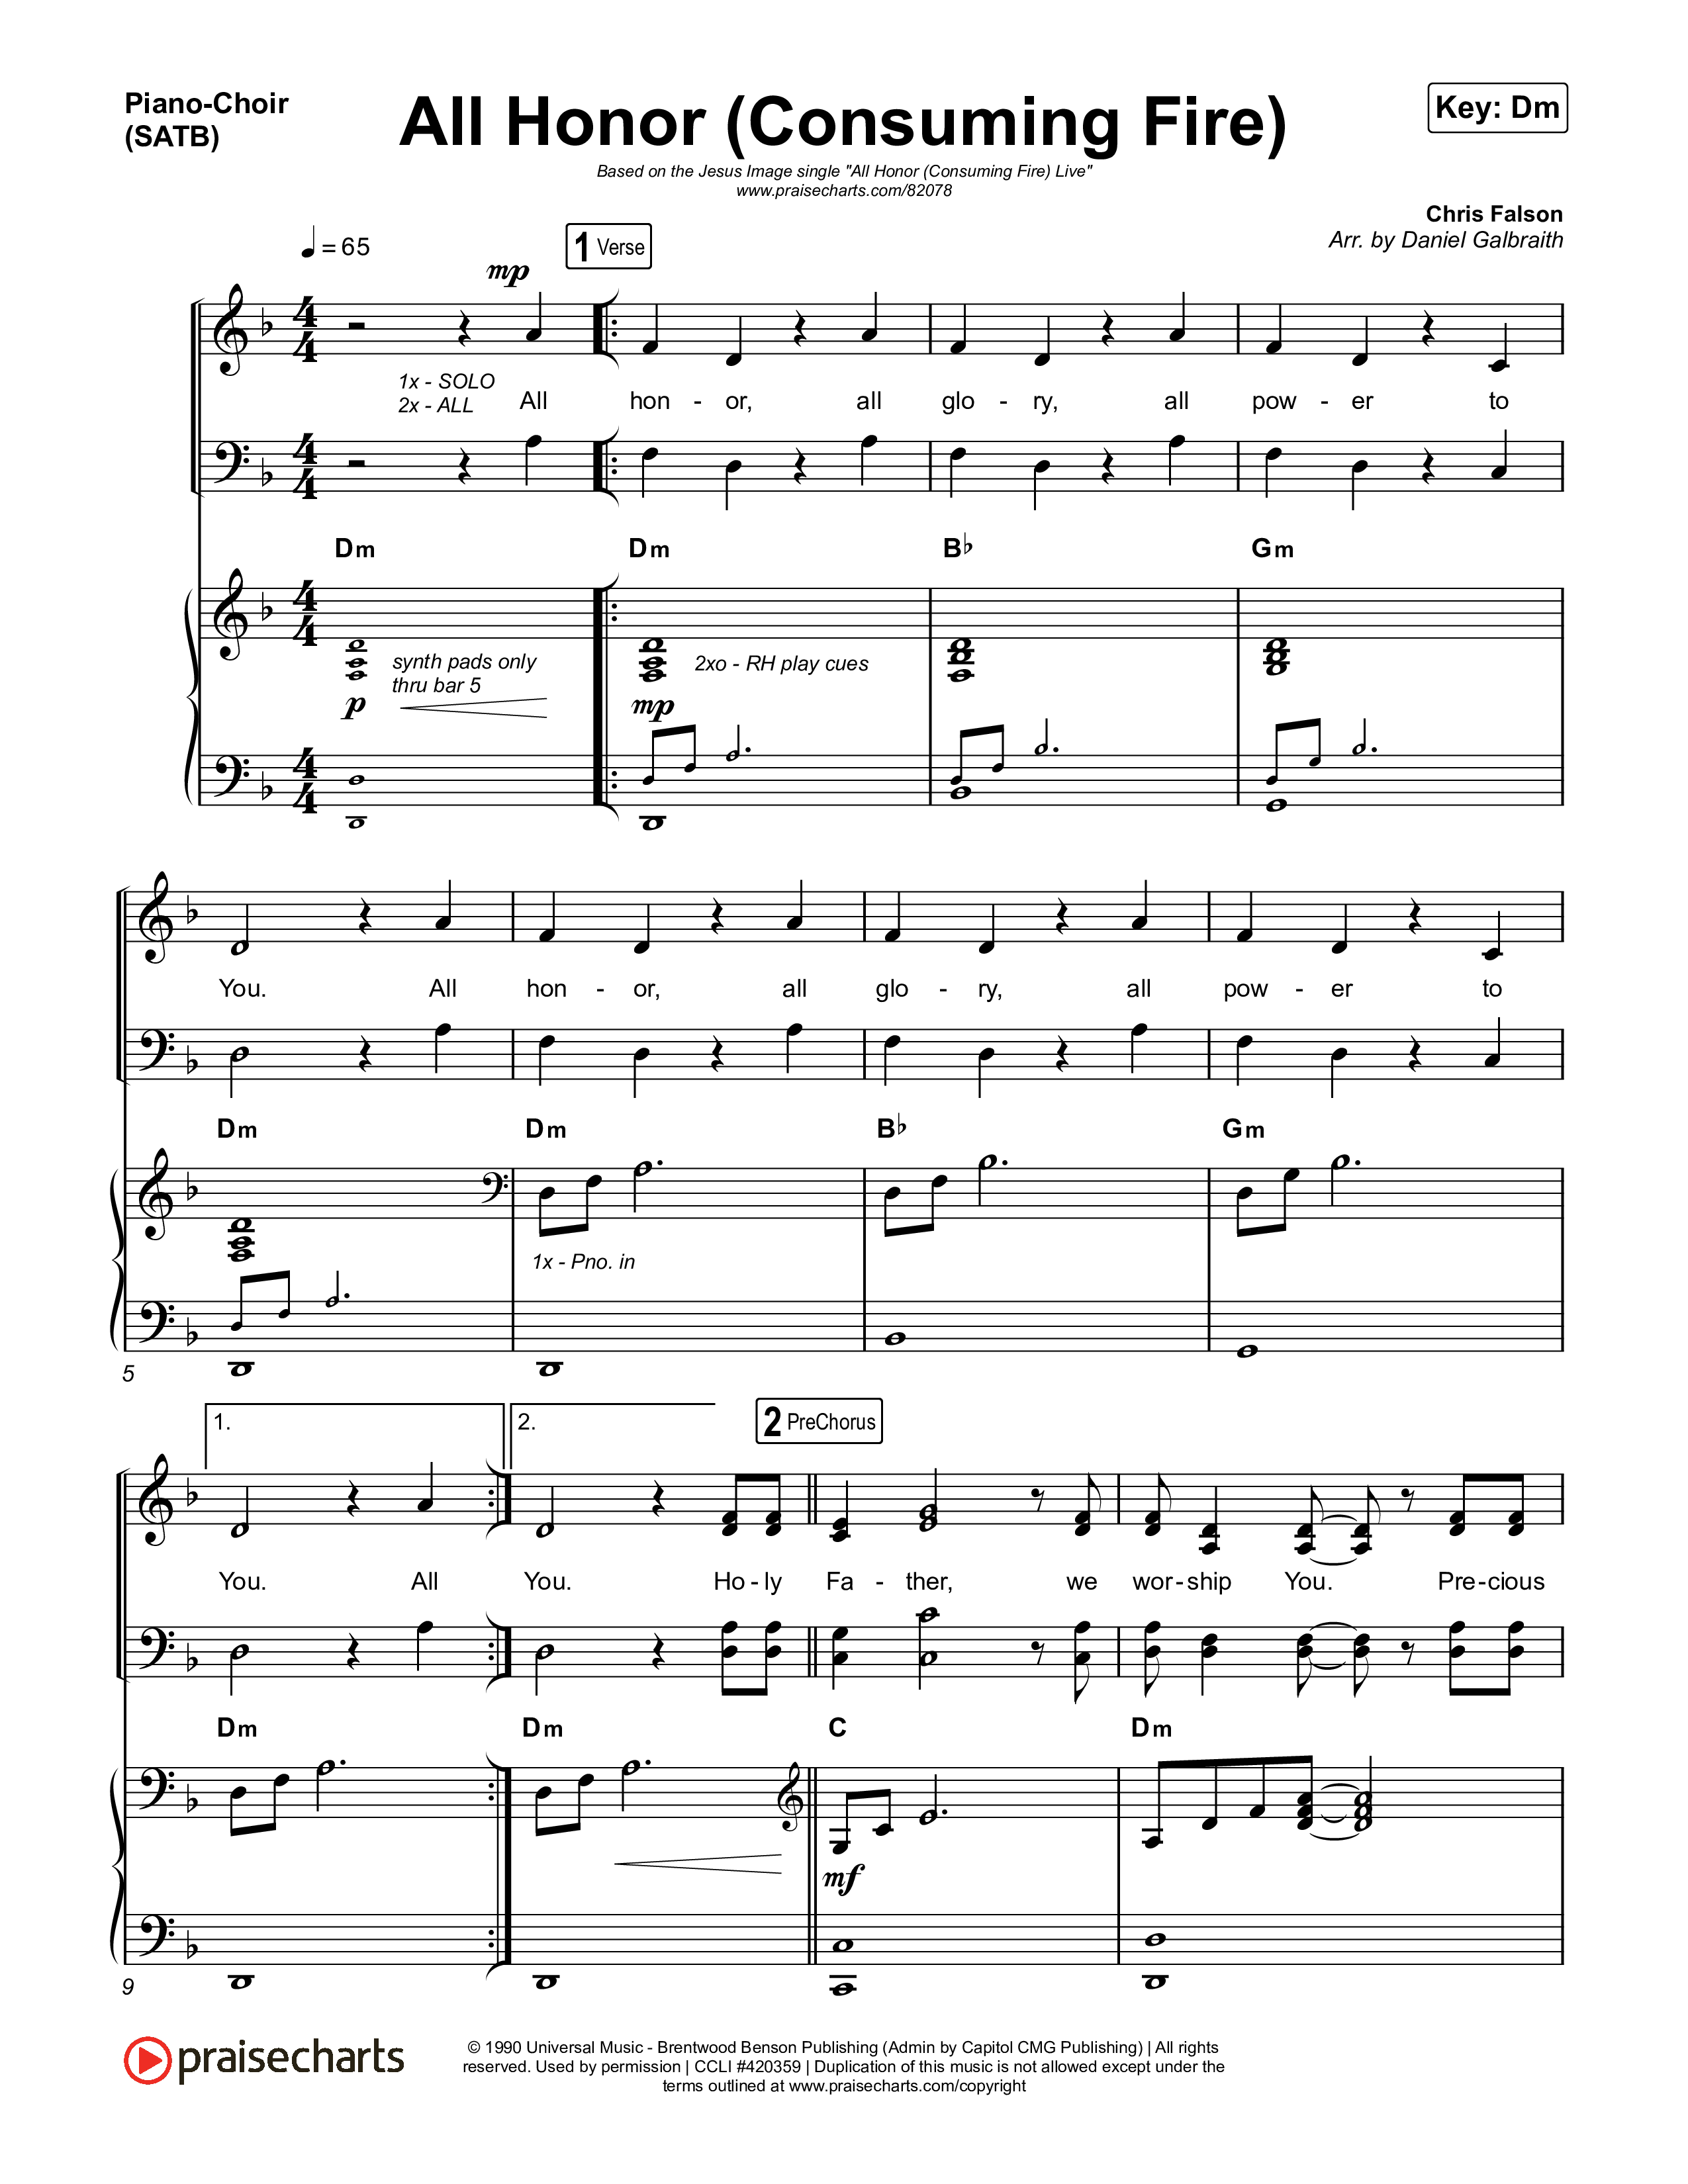 All Honor (Consuming Fire) Piano/Vocal (SATB) (Jesus Image)